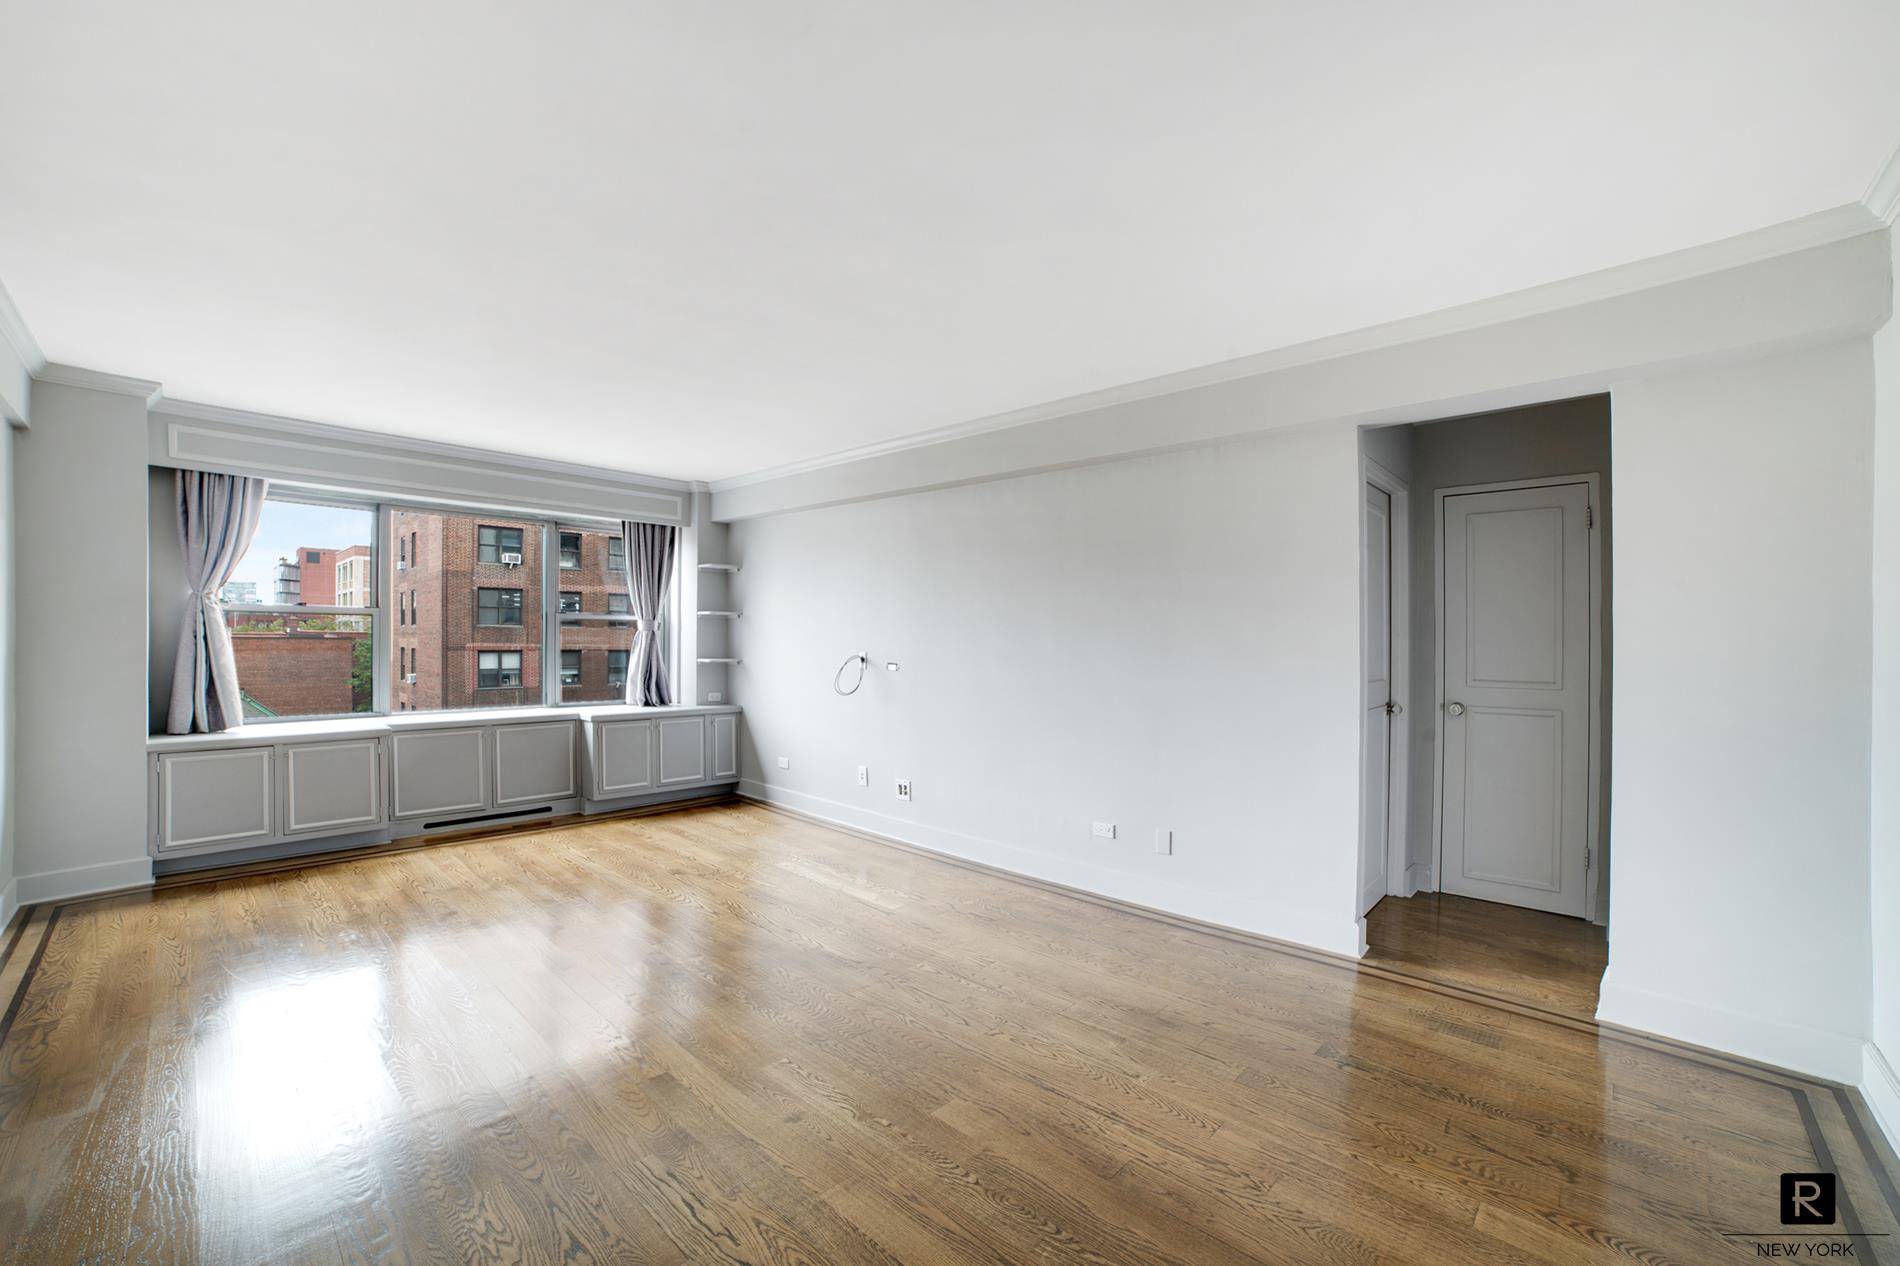 WEST FACING SPACIOUS 1 BED WITH GREAT LIGHT IN A WELL MAINTAINED LUXURY BUILDING IN THE WEST VILLAGE.